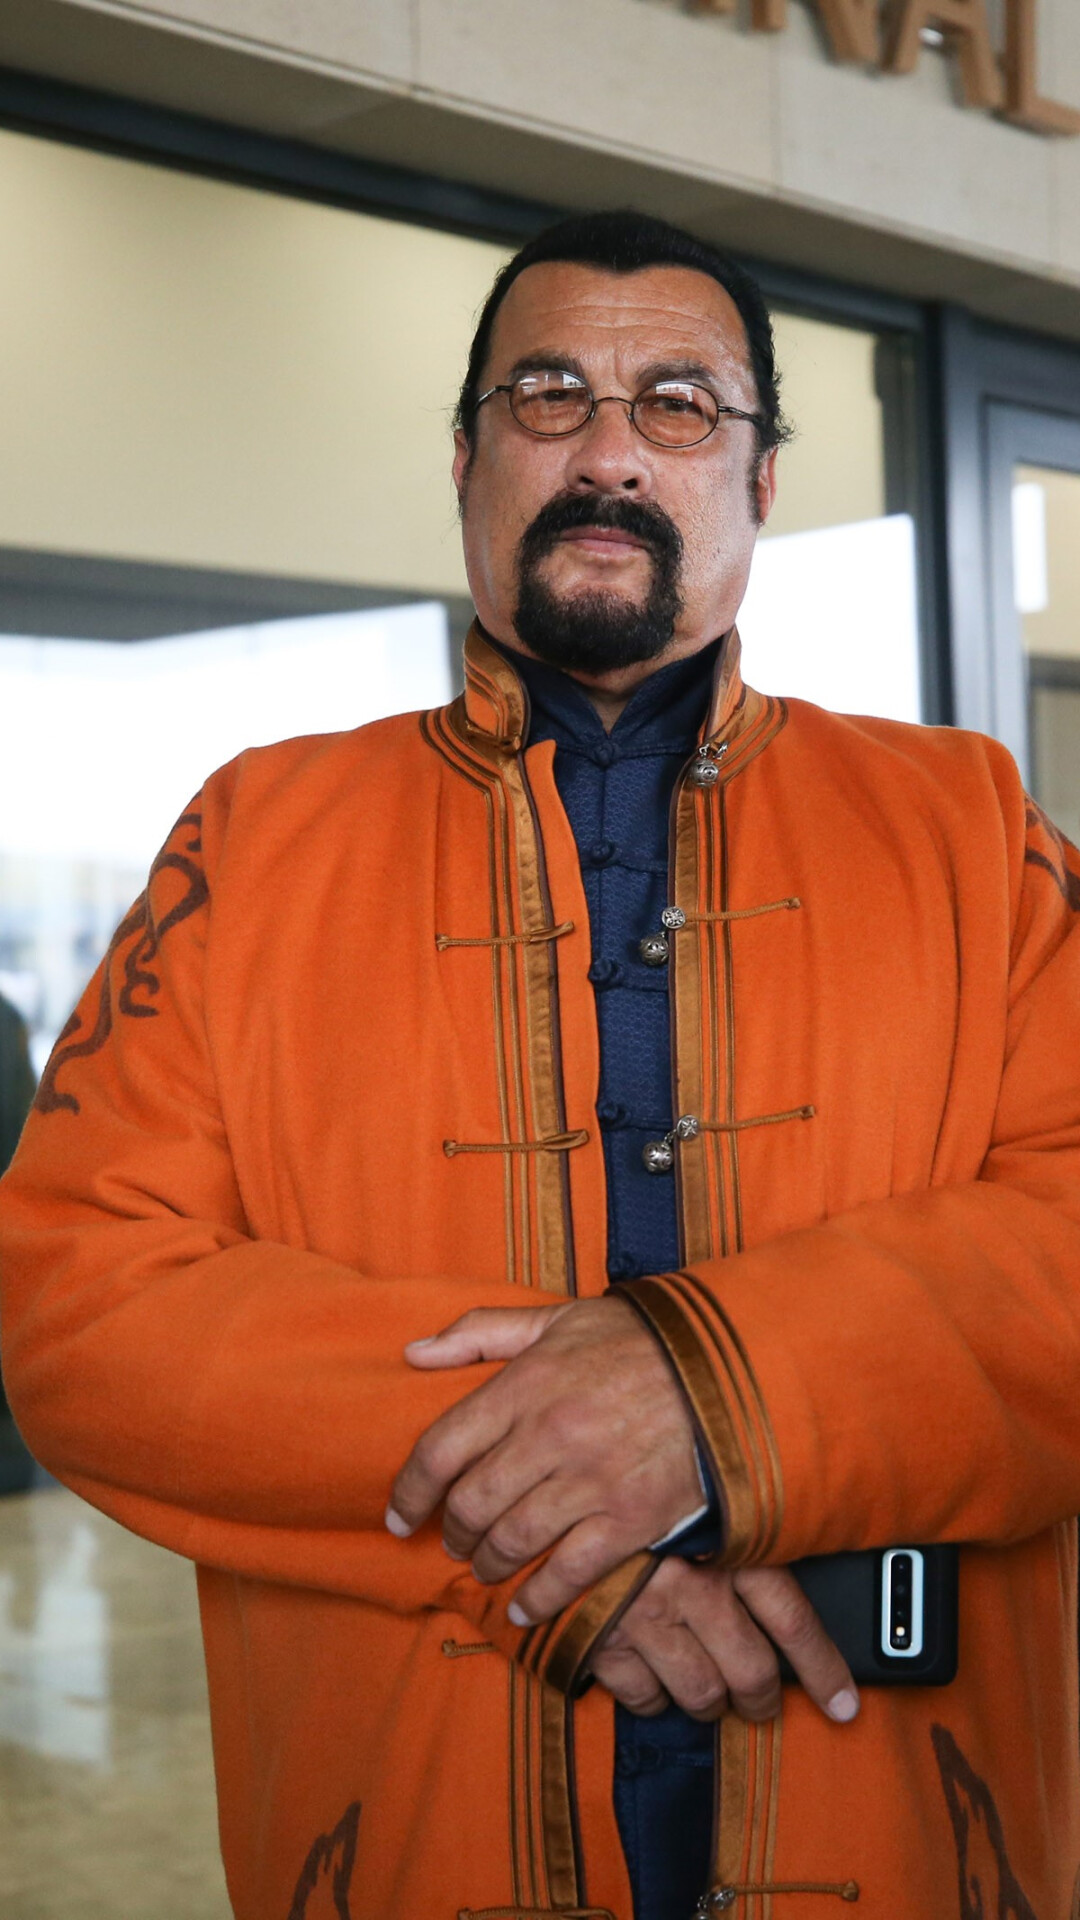 Steven Seagal: US actor, The visit to Turkey, Martial arts enthusiast and Putin admirer, The winner of multiple awards. 1080x1920 Full HD Wallpaper.